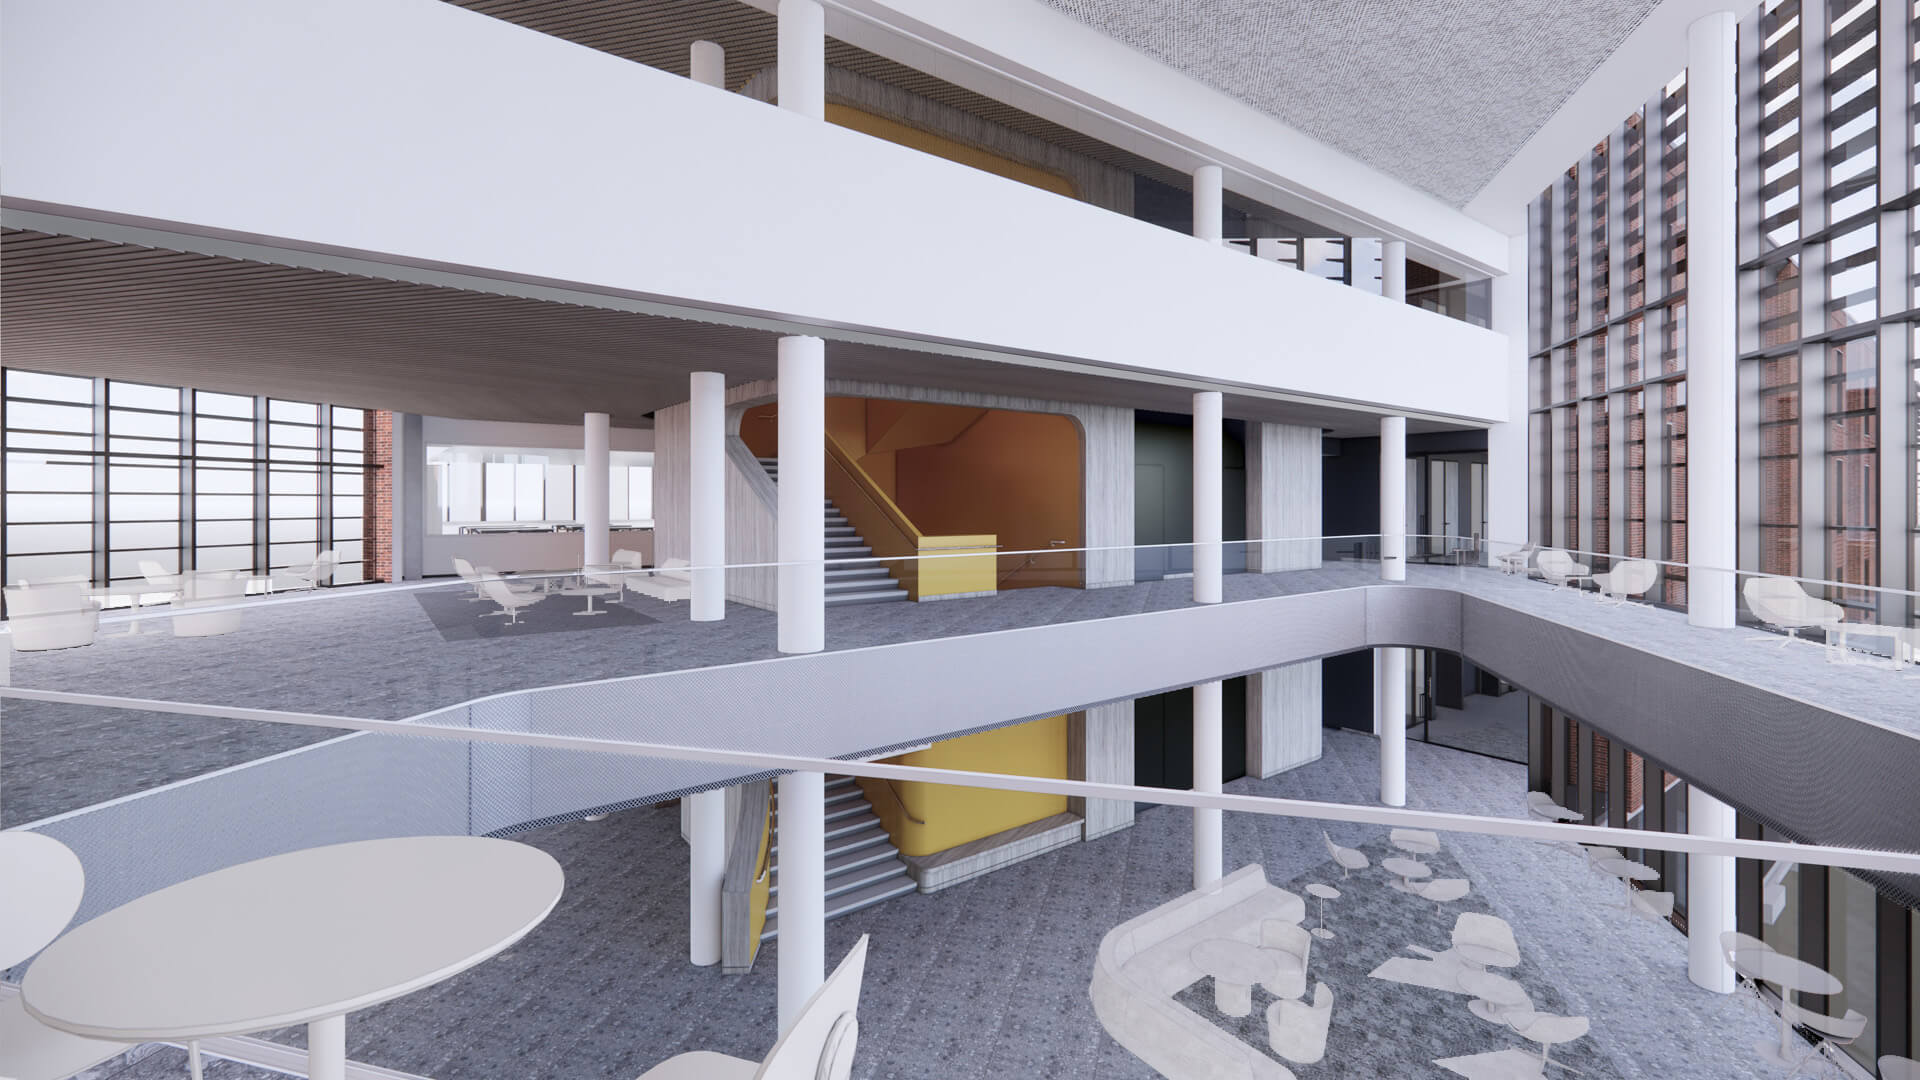 Render of the second floor view from the general academics building.